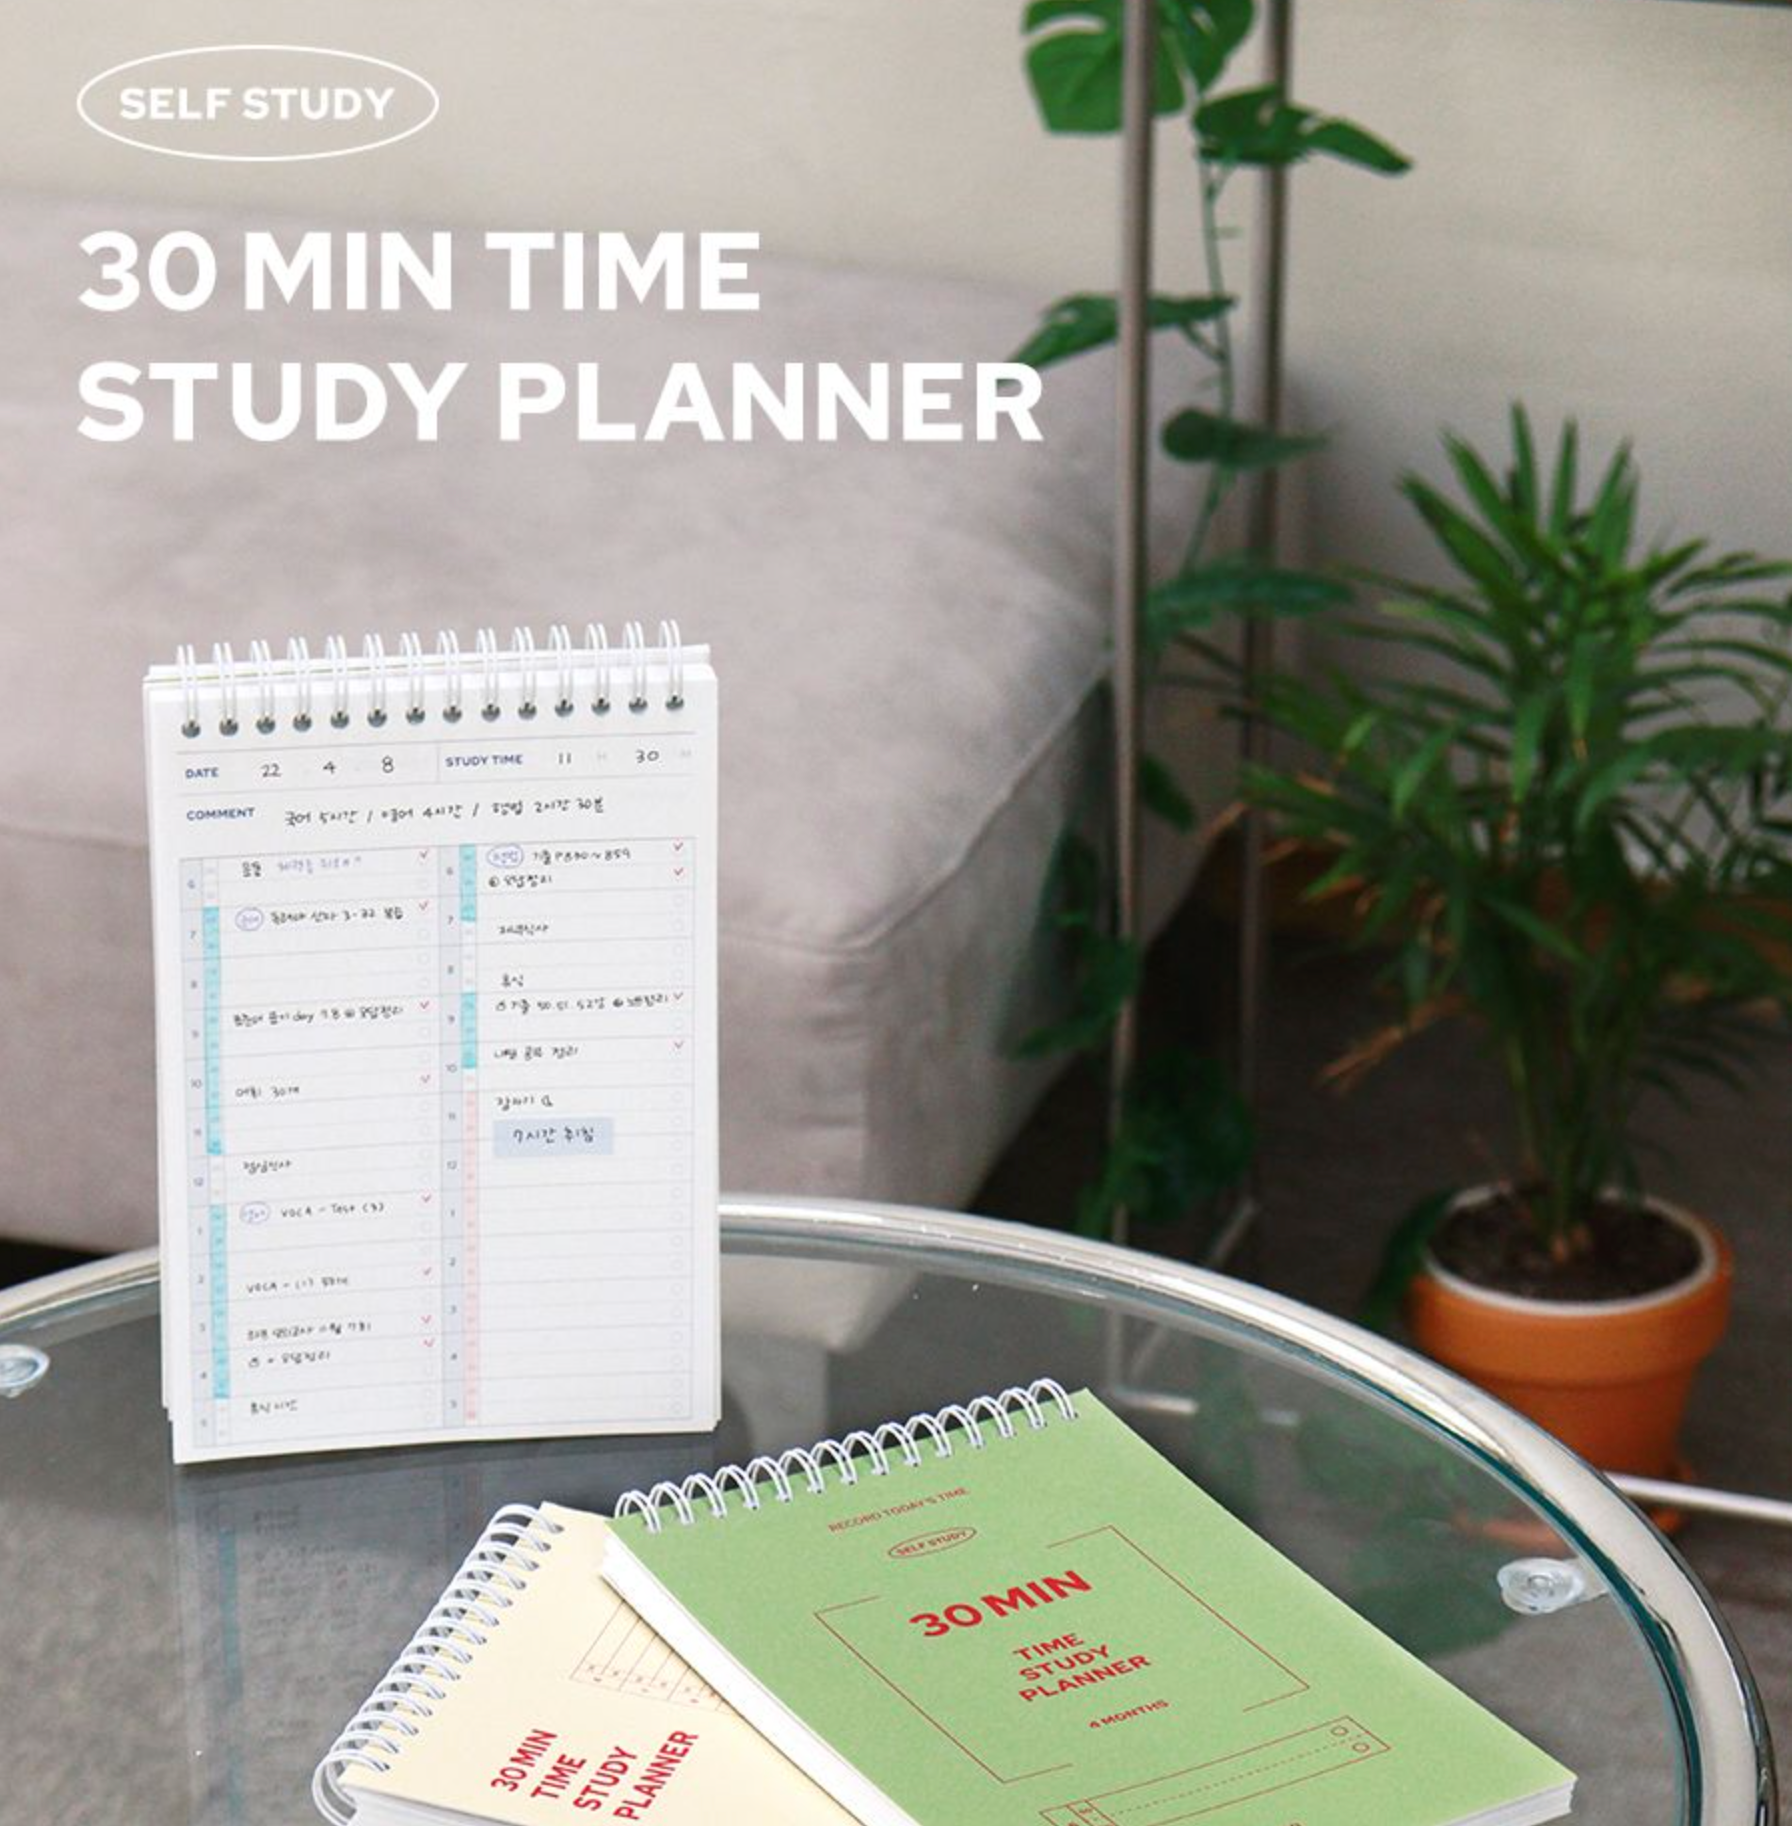 30 Min Time Study Planner